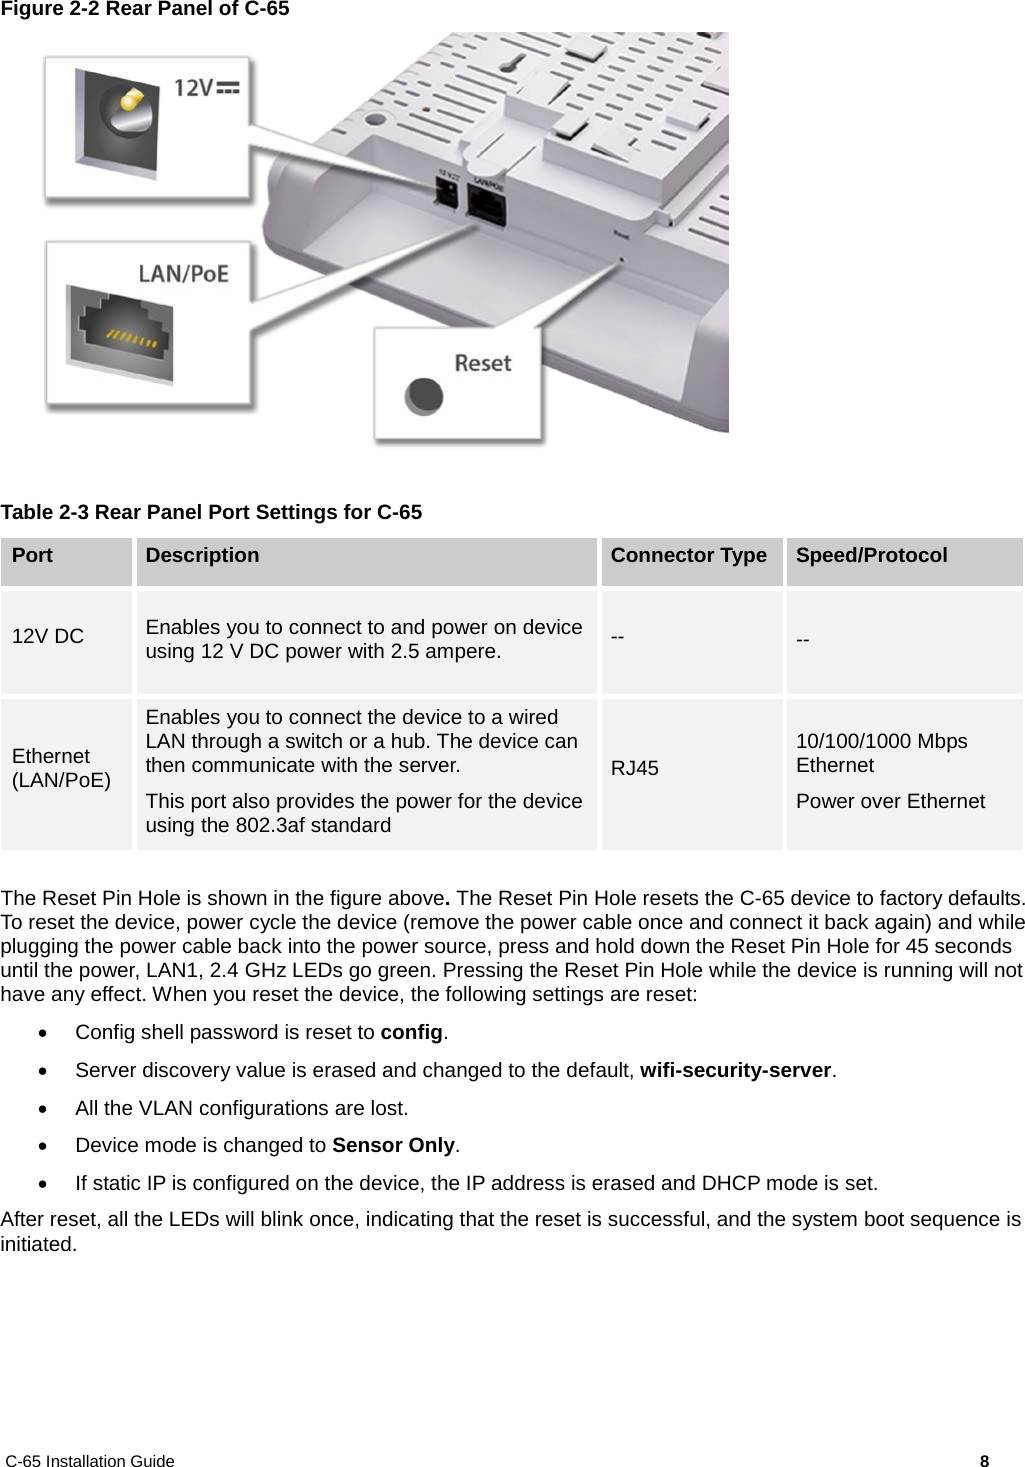 C-65 Installation Guide        8  Figure 2-2 Rear Panel of C-65   Table 2-3 Rear Panel Port Settings for C-65 Port Description Connector Type Speed/Protocol 12V DC Enables you to connect to and power on device using 12 V DC power with 2.5 ampere. -- -- Ethernet (LAN/PoE) Enables you to connect the device to a wired LAN through a switch or a hub. The device can then communicate with the server. This port also provides the power for the device using the 802.3af standard RJ45 10/100/1000 Mbps Ethernet Power over Ethernet  The Reset Pin Hole is shown in the figure above. The Reset Pin Hole resets the C-65 device to factory defaults. To reset the device, power cycle the device (remove the power cable once and connect it back again) and while plugging the power cable back into the power source, press and hold down the Reset Pin Hole for 45 seconds until the power, LAN1, 2.4 GHz LEDs go green. Pressing the Reset Pin Hole while the device is running will not have any effect. When you reset the device, the following settings are reset: • Config shell password is reset to config. • Server discovery value is erased and changed to the default, wifi-security-server. • All the VLAN configurations are lost. • Device mode is changed to Sensor Only. • If static IP is configured on the device, the IP address is erased and DHCP mode is set. After reset, all the LEDs will blink once, indicating that the reset is successful, and the system boot sequence is initiated.  